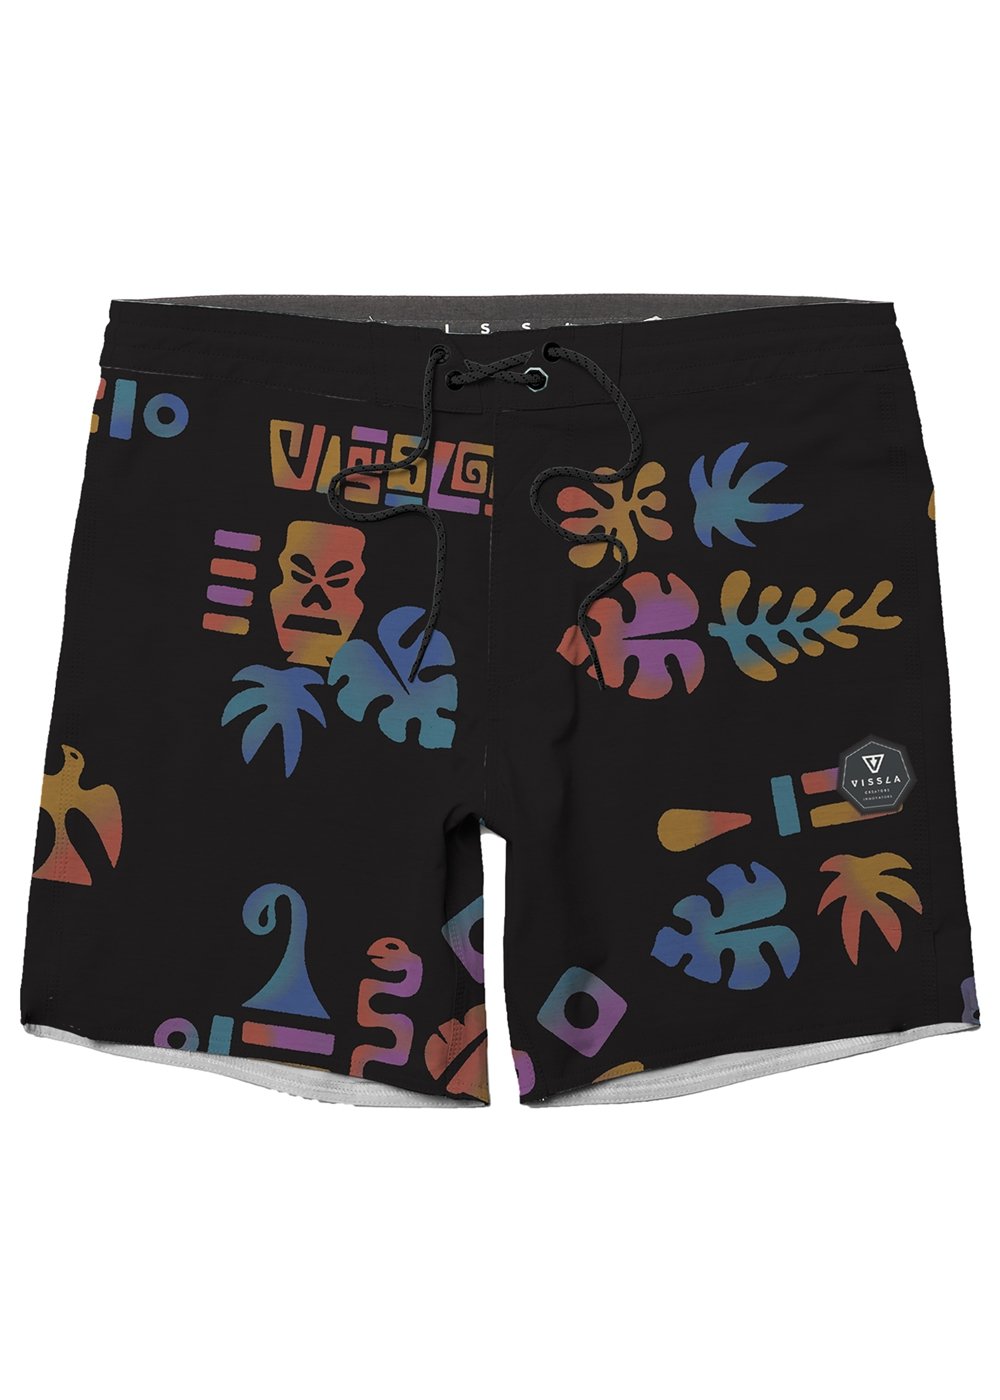 Vissla Black 17" Yeah You Boys Boardshort Front View. Multi Color with Patch.